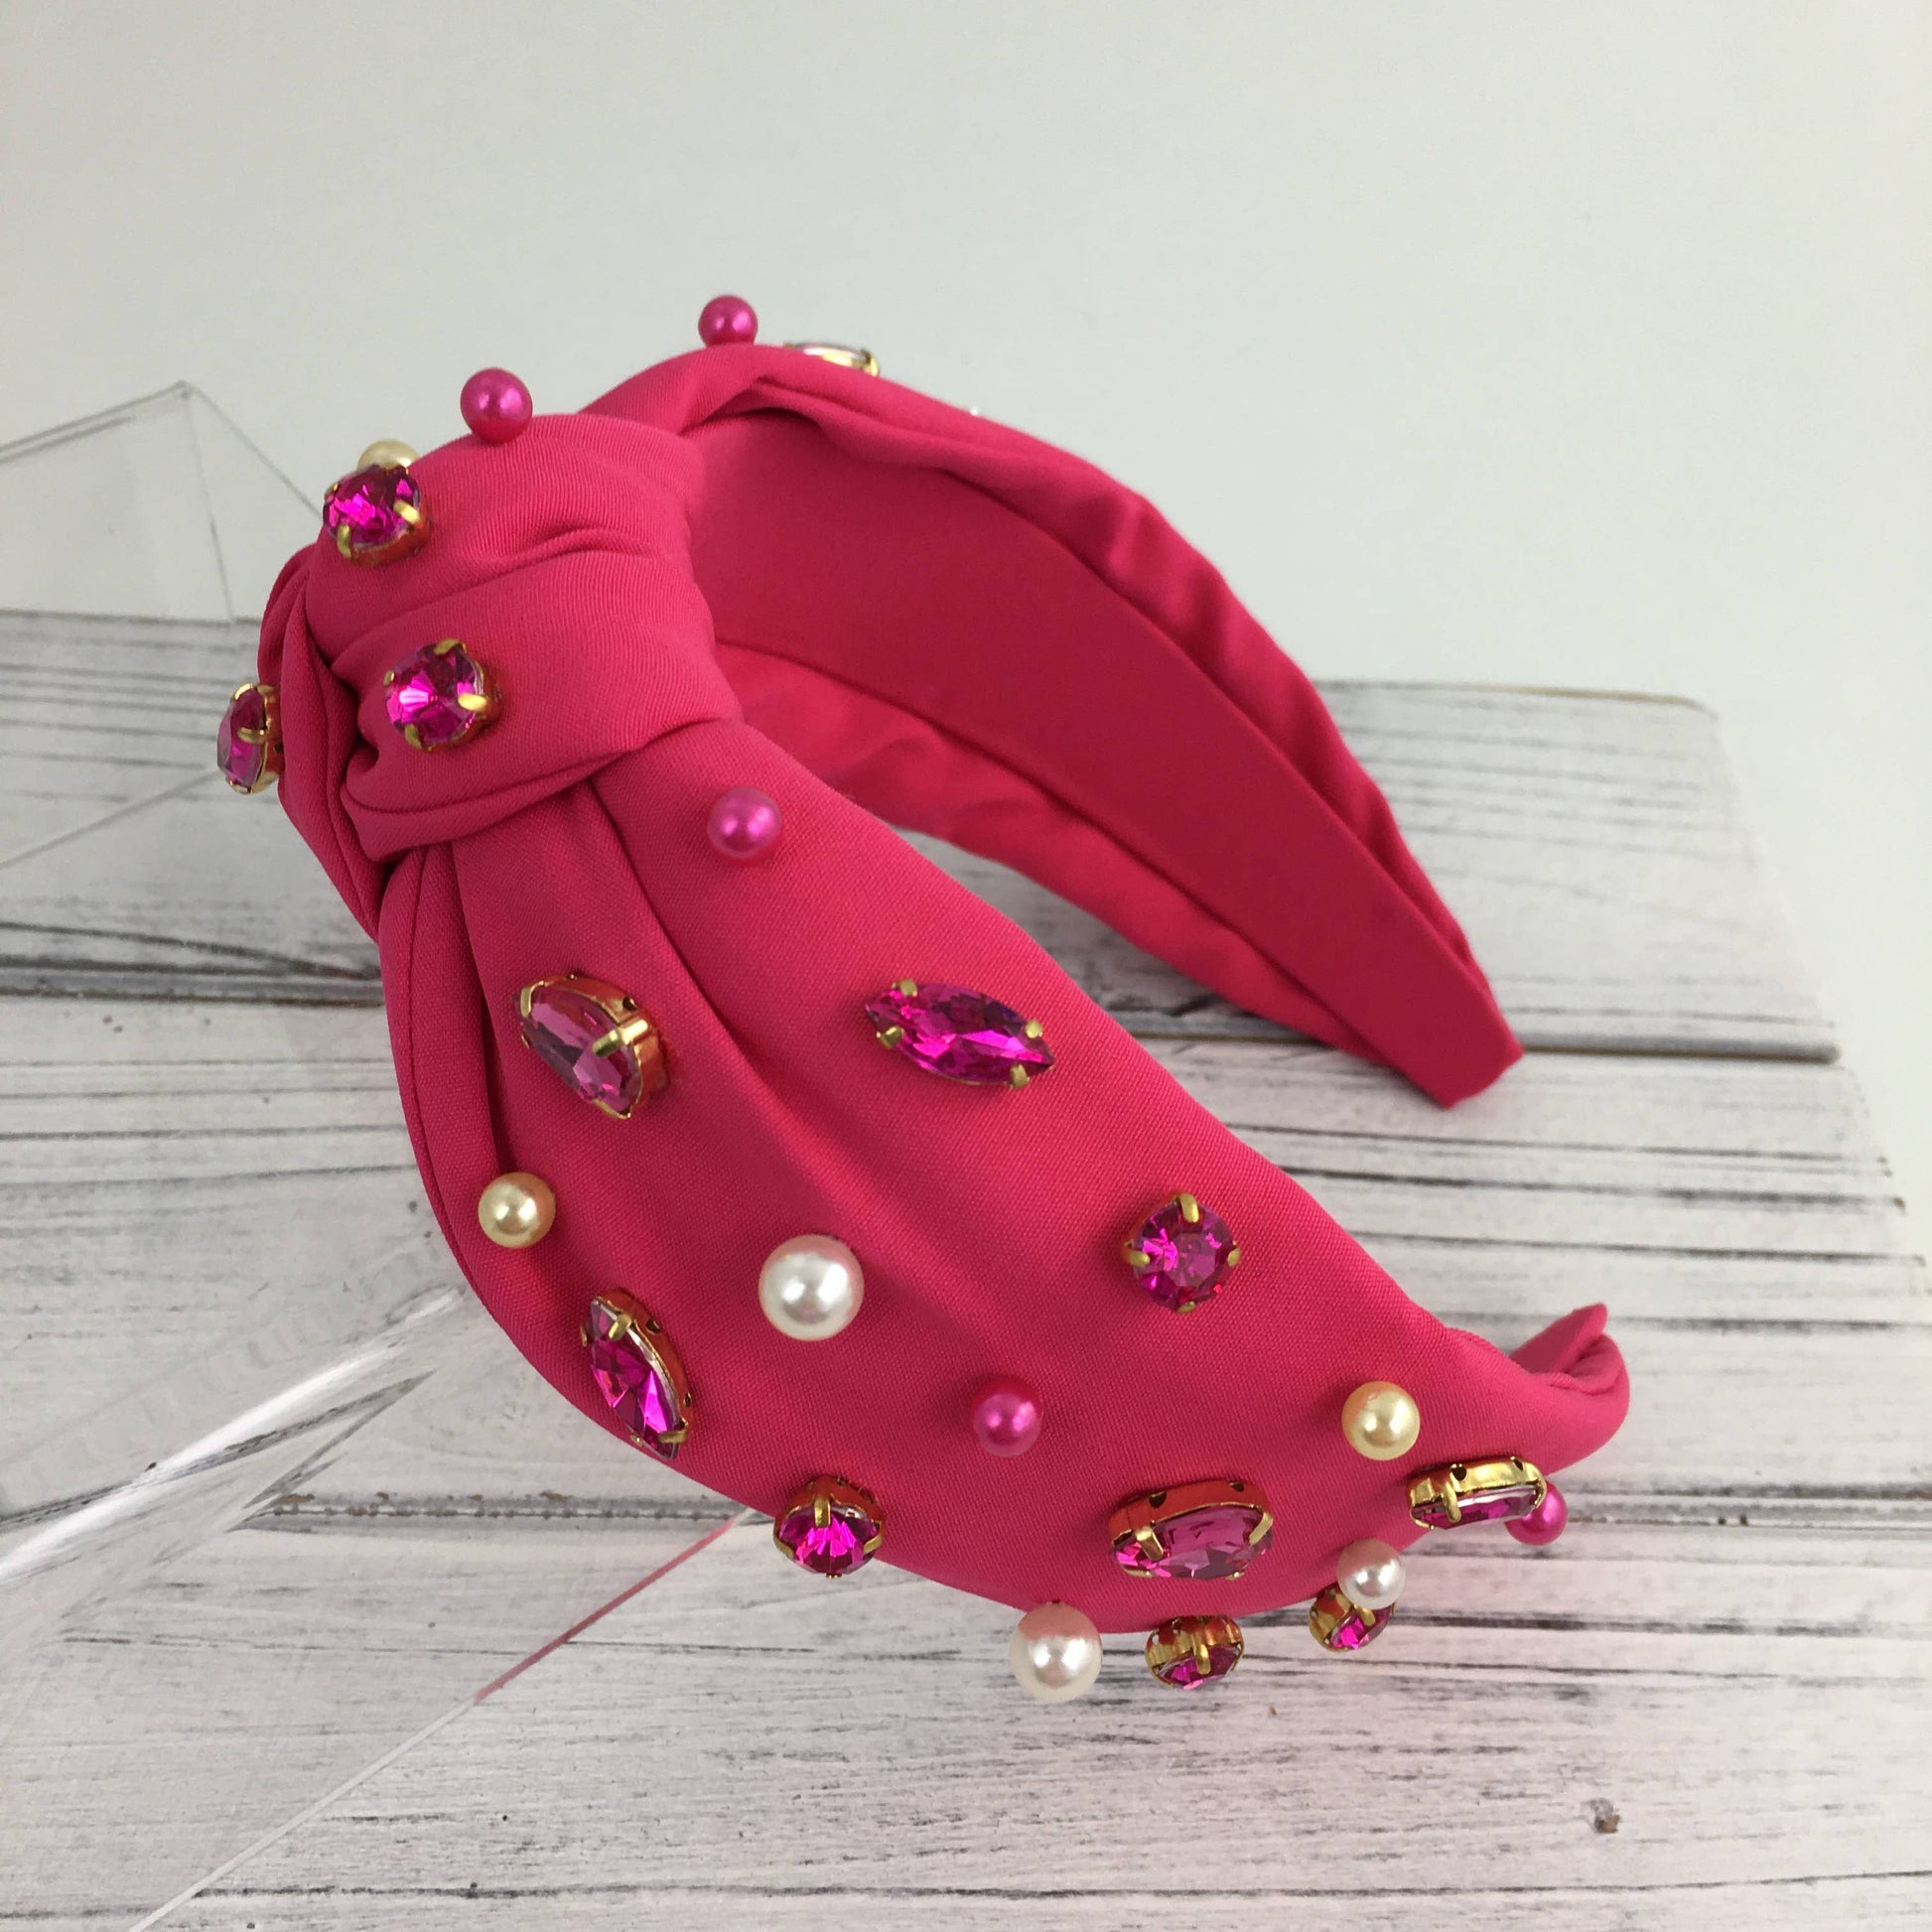 A SongLily hot pink stone/pearl fashion knot headband adorned with pearls and rhinestones.